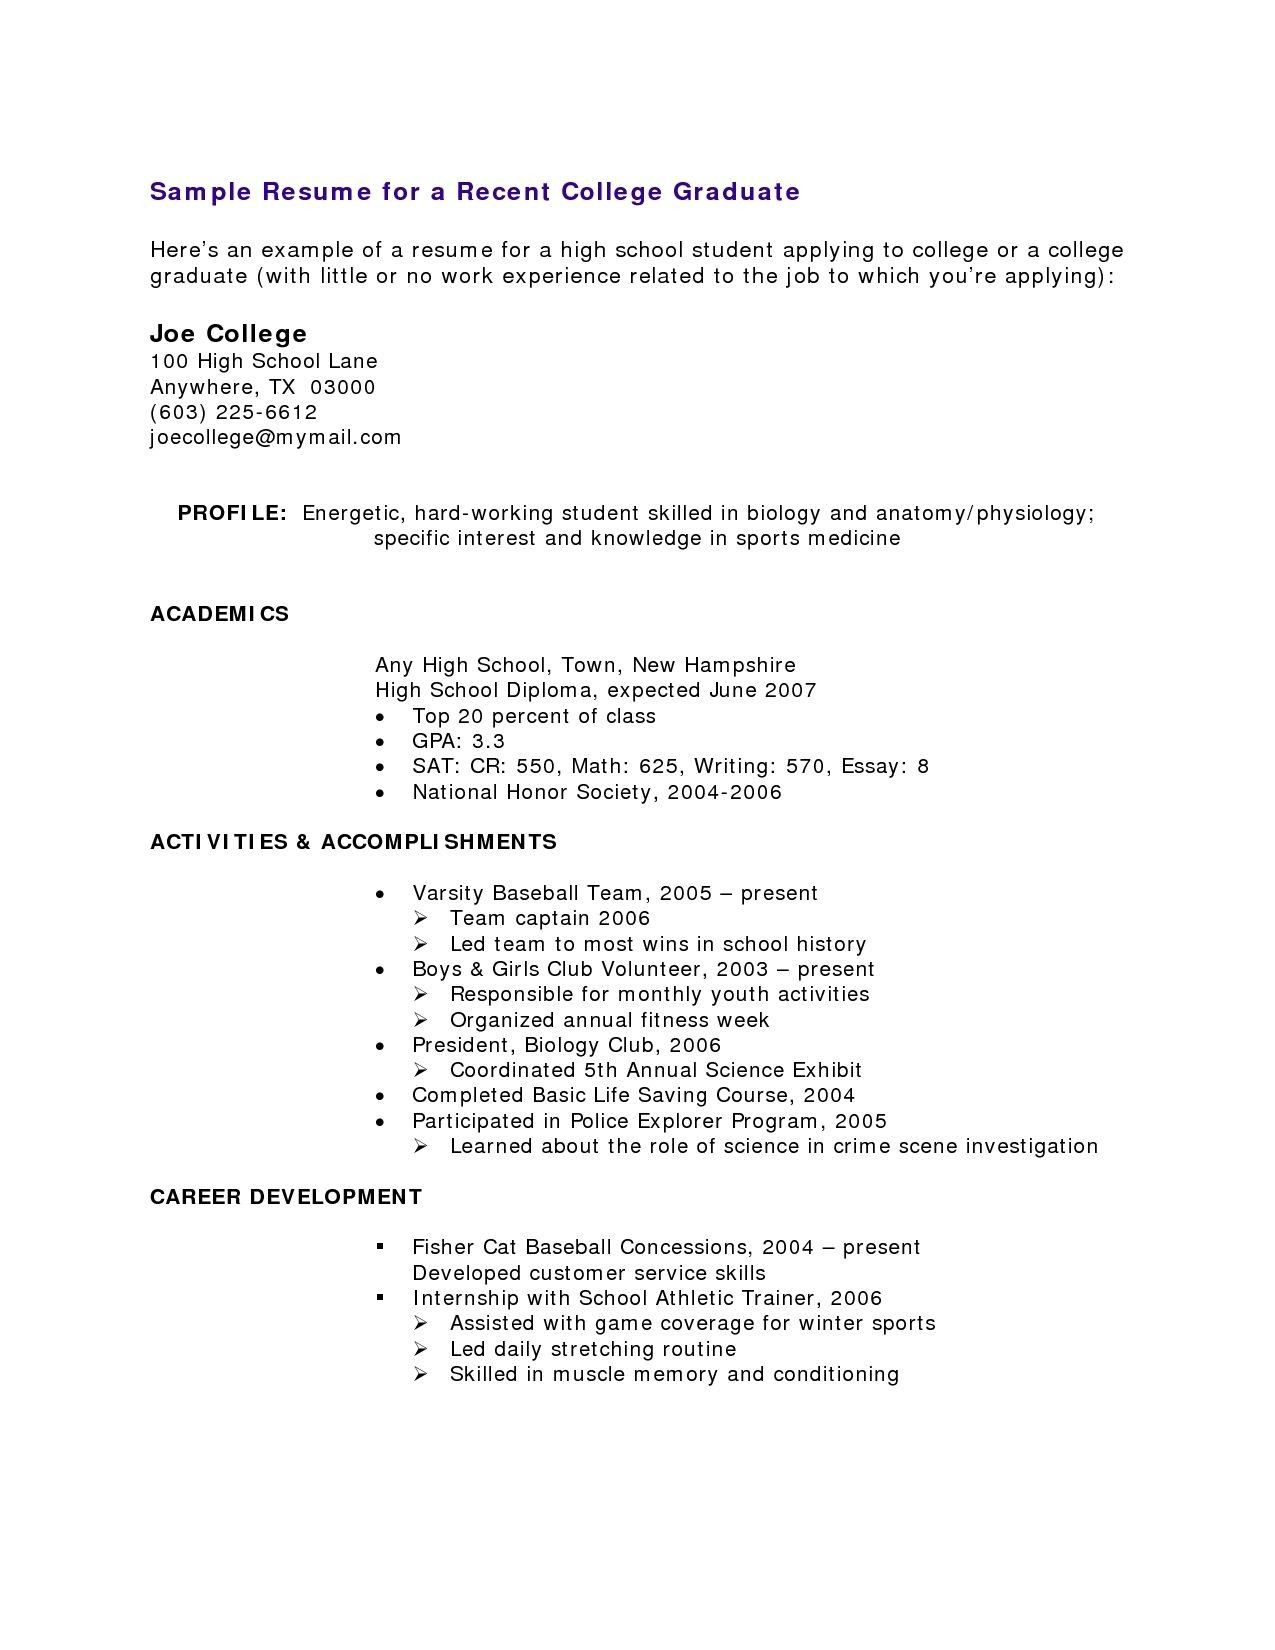 Sample Resume for College Student with No Work History 65 Best event Planner Resume Ideas event Planner Resume, Resume …